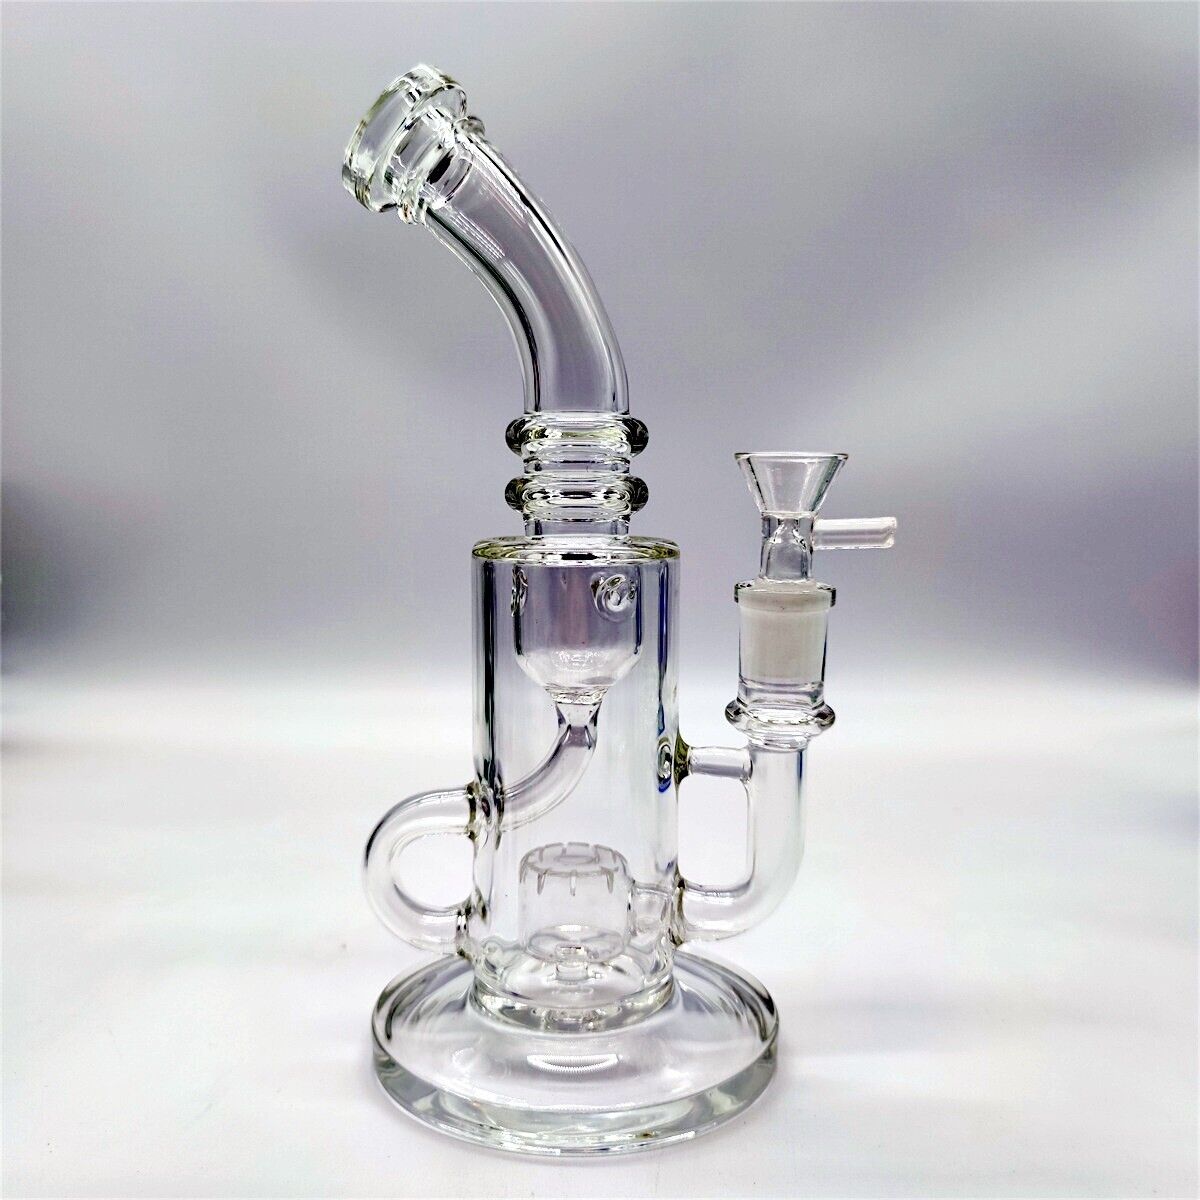 10 Inch Fab Egg Slit Hub Deluxe Recycler Glass Bong Water Pipe Hookah 14MM